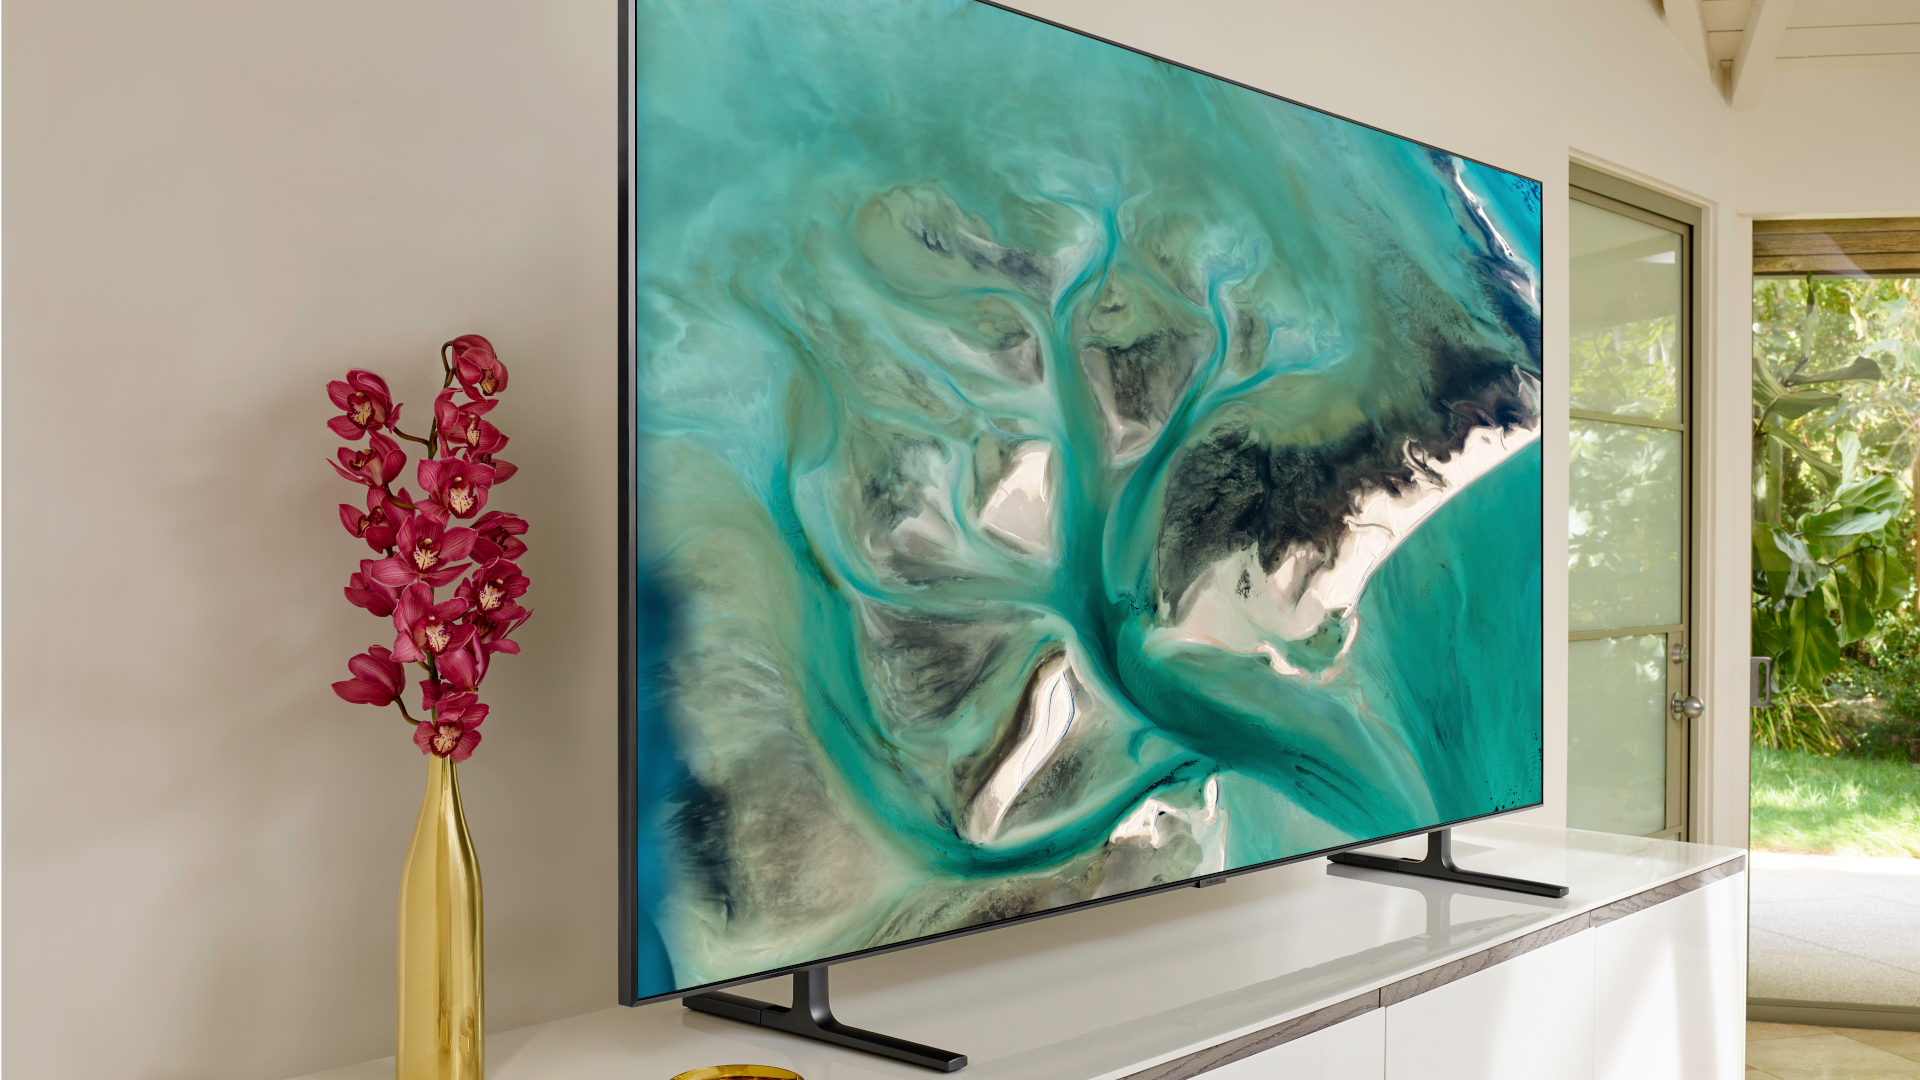 Samsung TV Catalog 2019: Every new Samsung TV coming in 2019 5